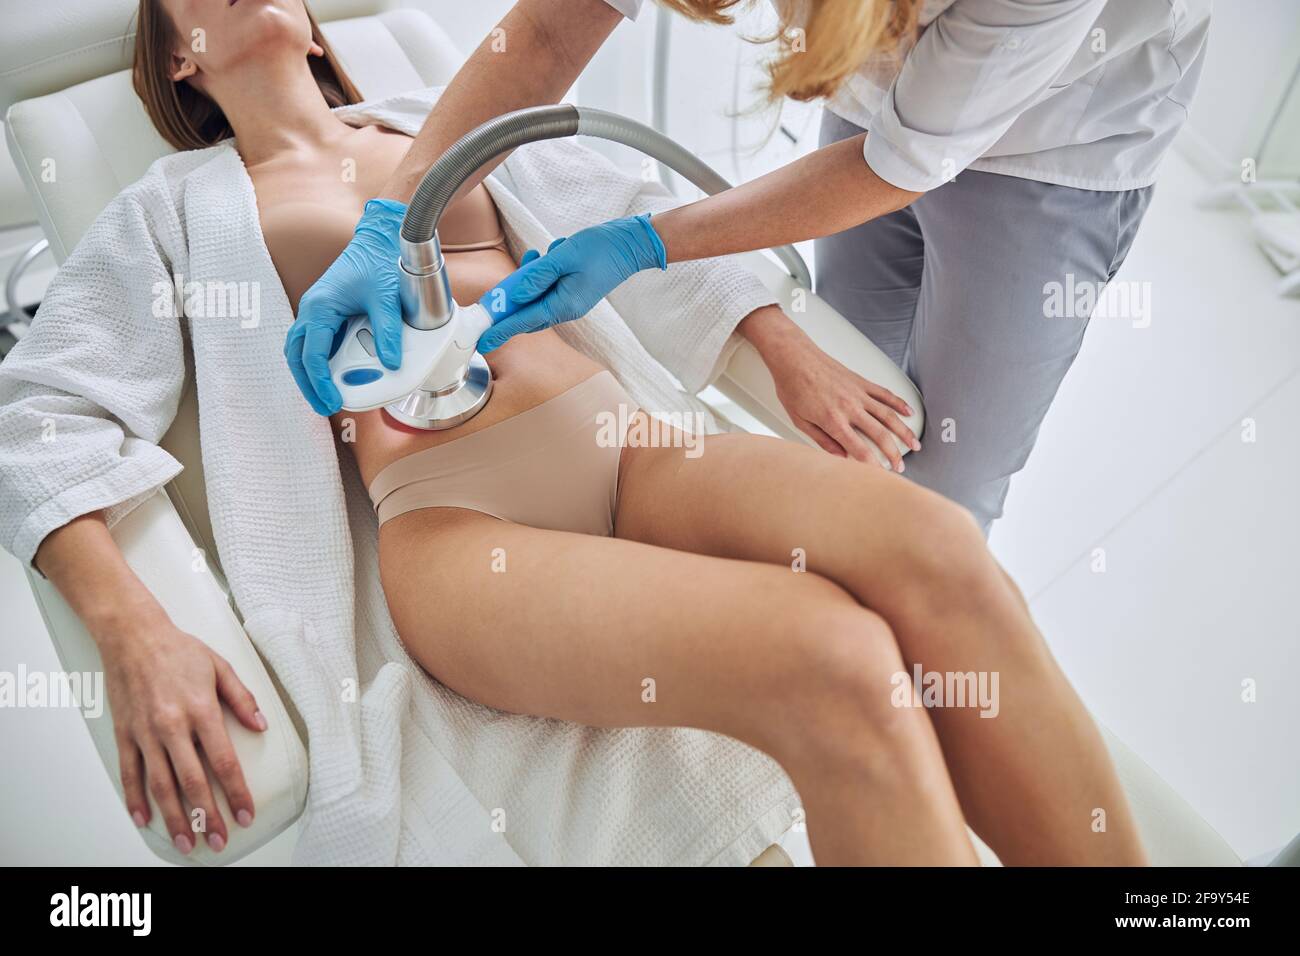 Unrecognized woman in white bathrobe receiving Ultrasound cavitation body contouring treatment in wellness clinic Stock Photo